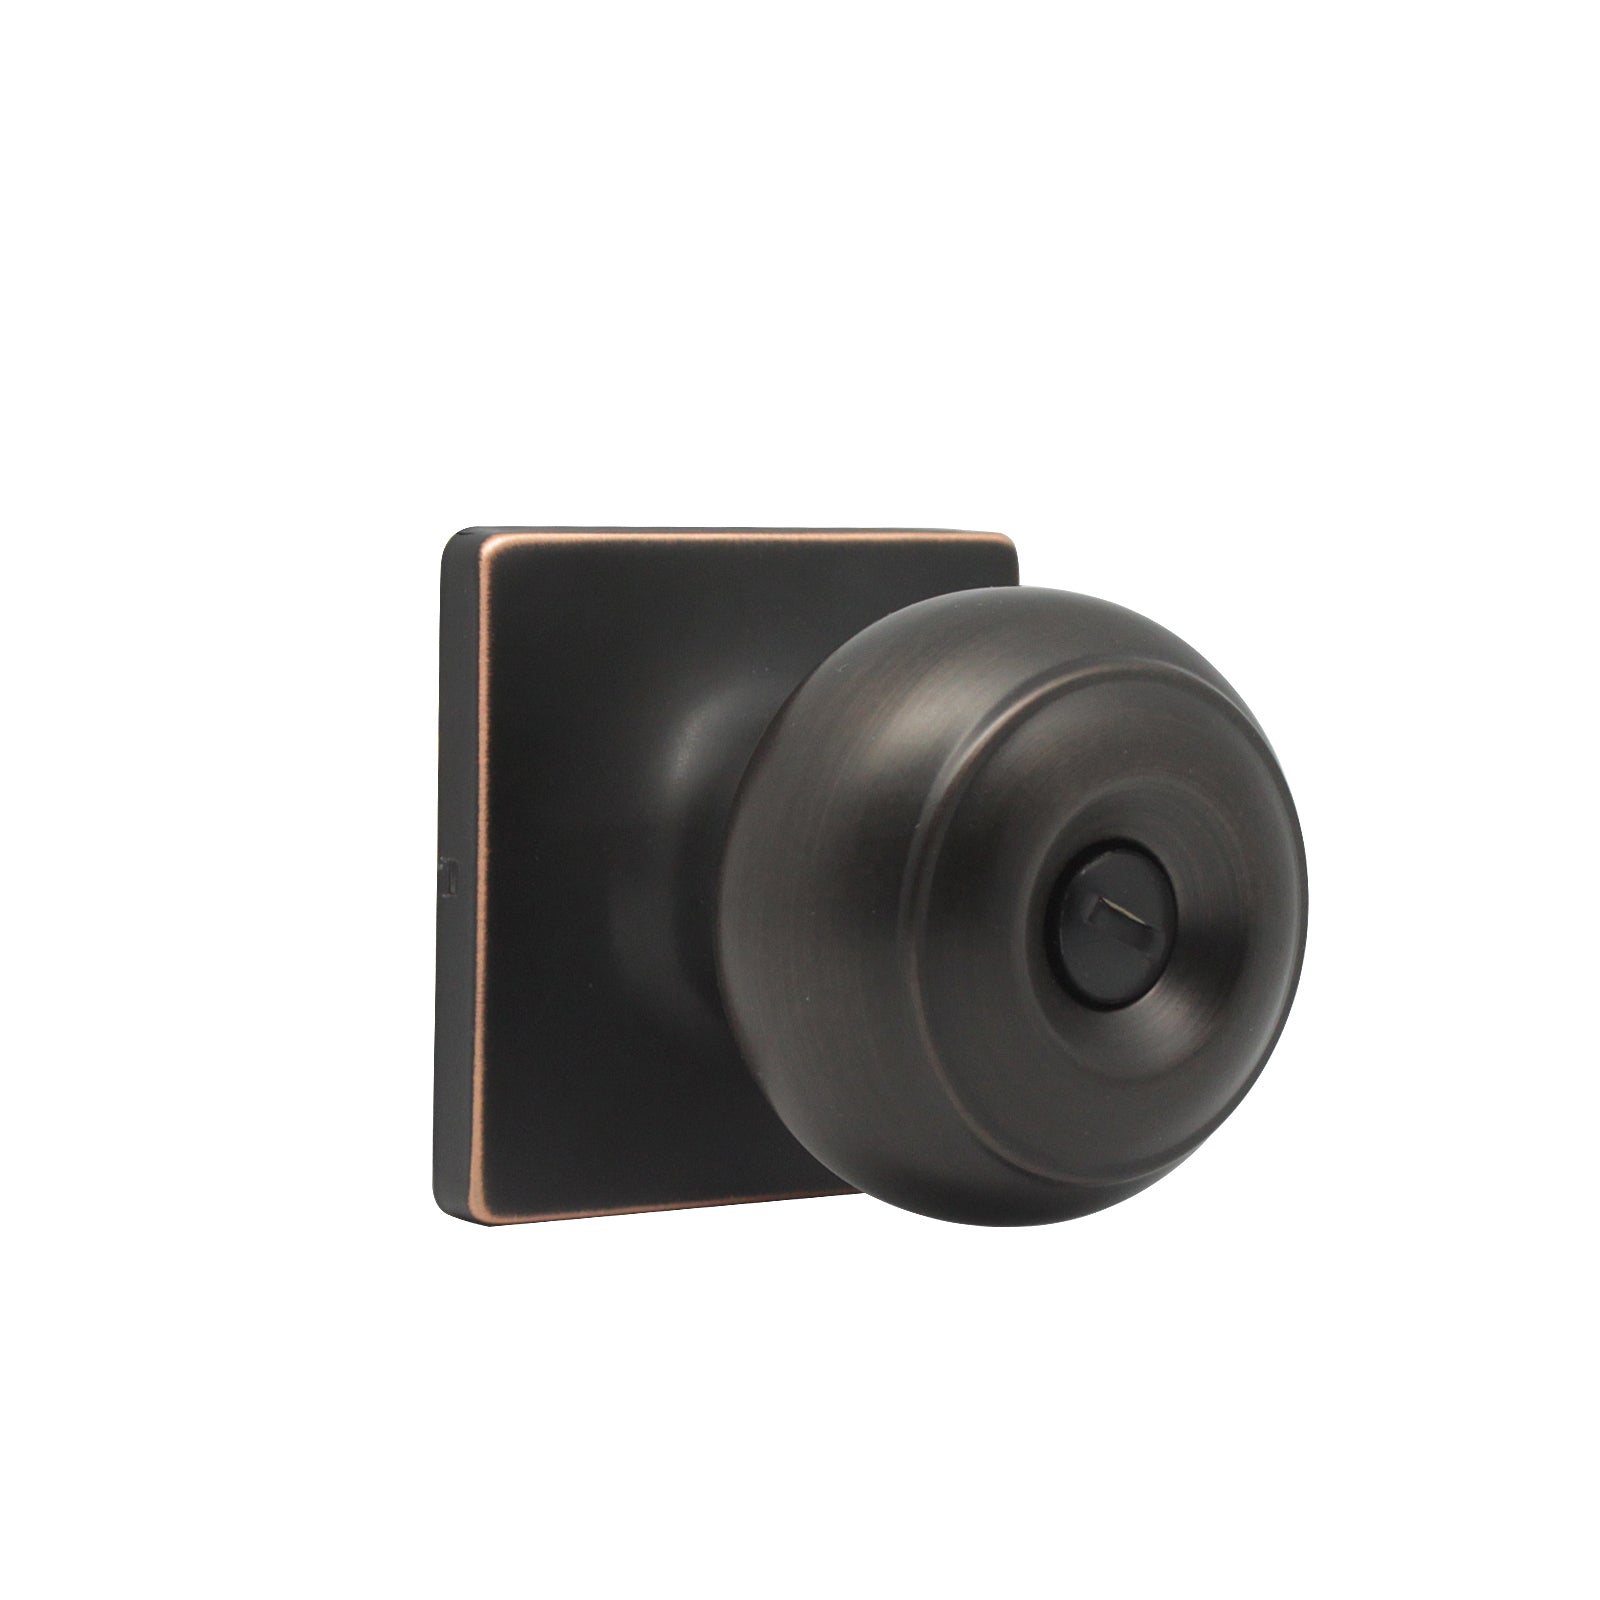 Flat Ball Knob with Square Rosette, Privacy Door Knobs Oil Rubbed Bronze Finish DLS09ORBBK